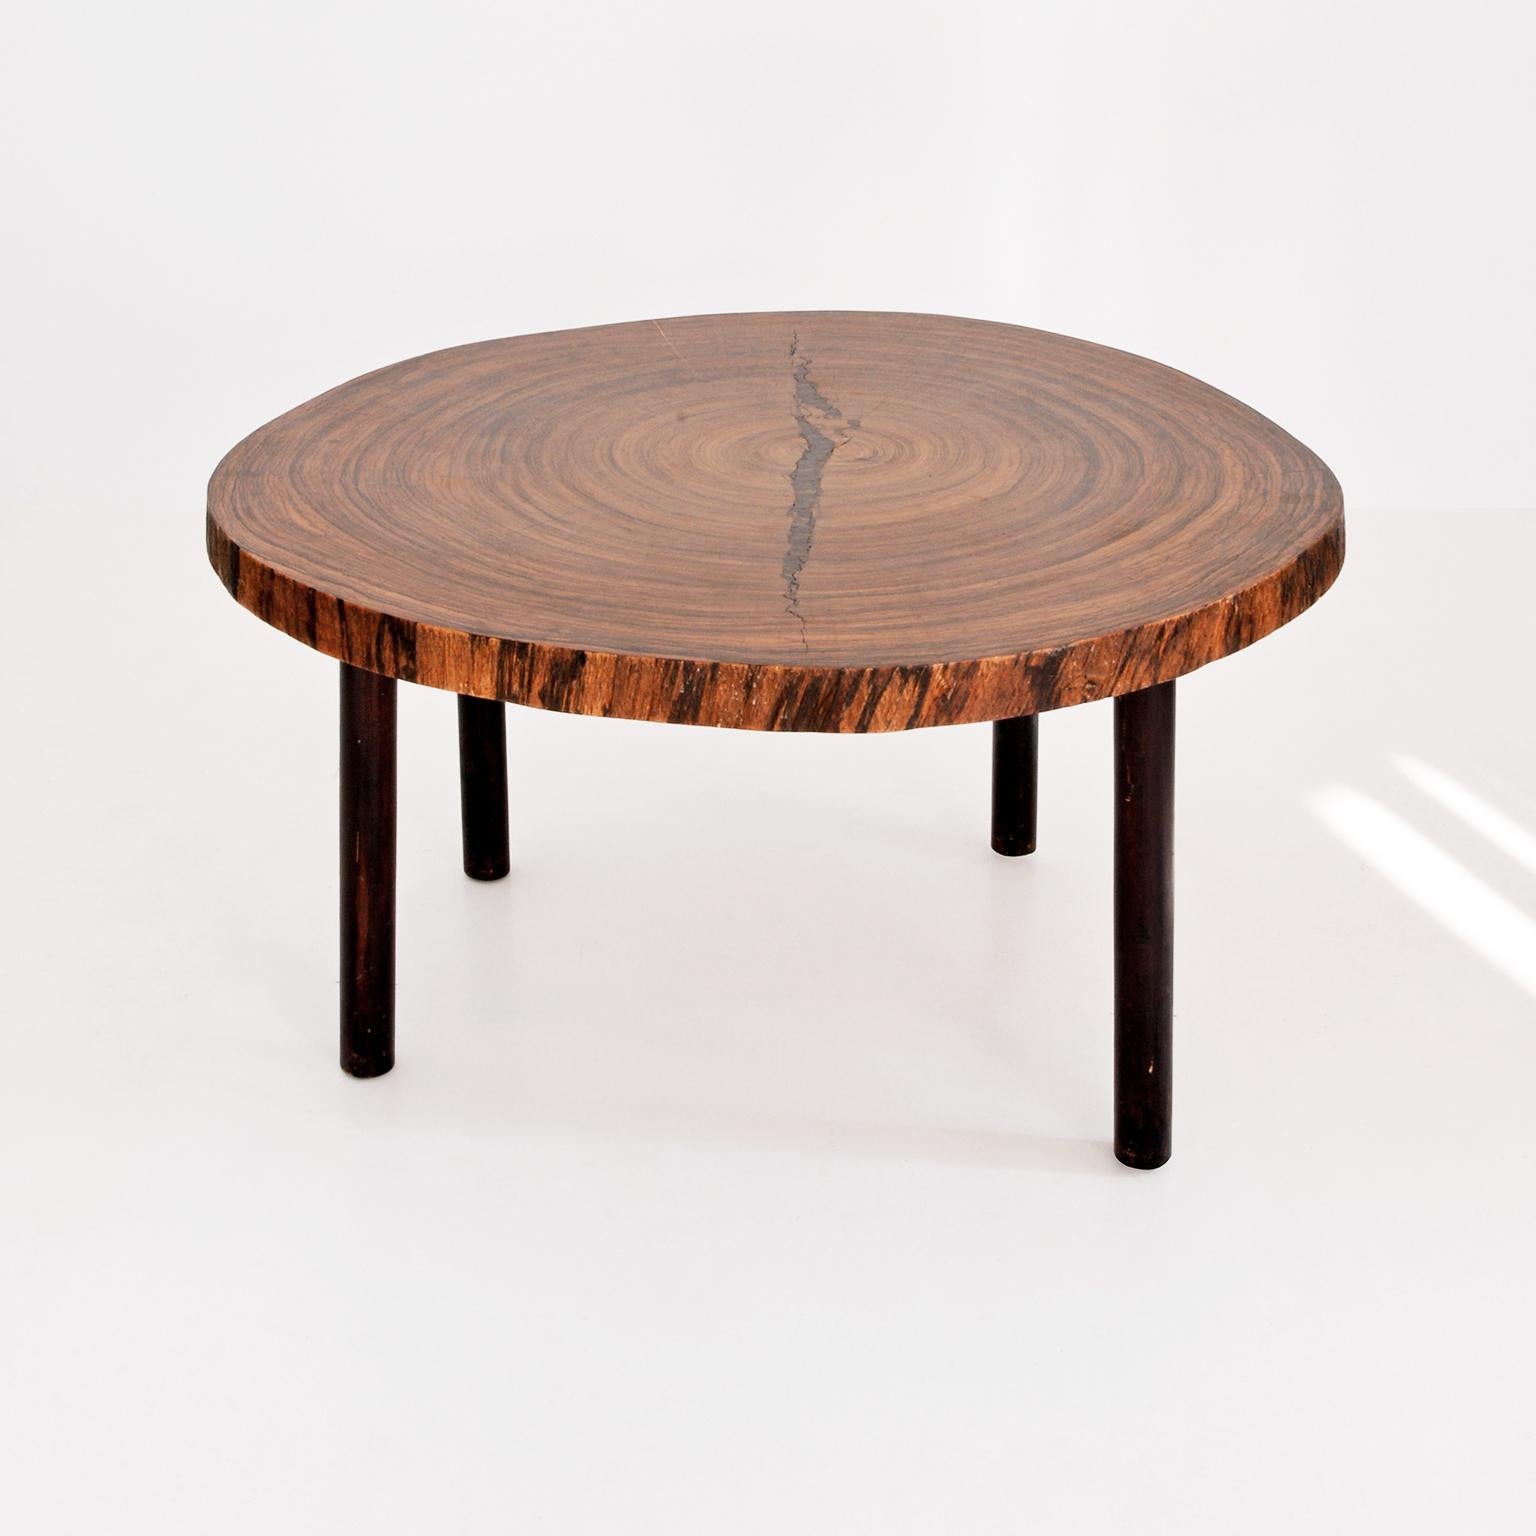 European Large Macassar Ebony Tree Trunk Couch Table with Polished Surface, C. 1960 For Sale